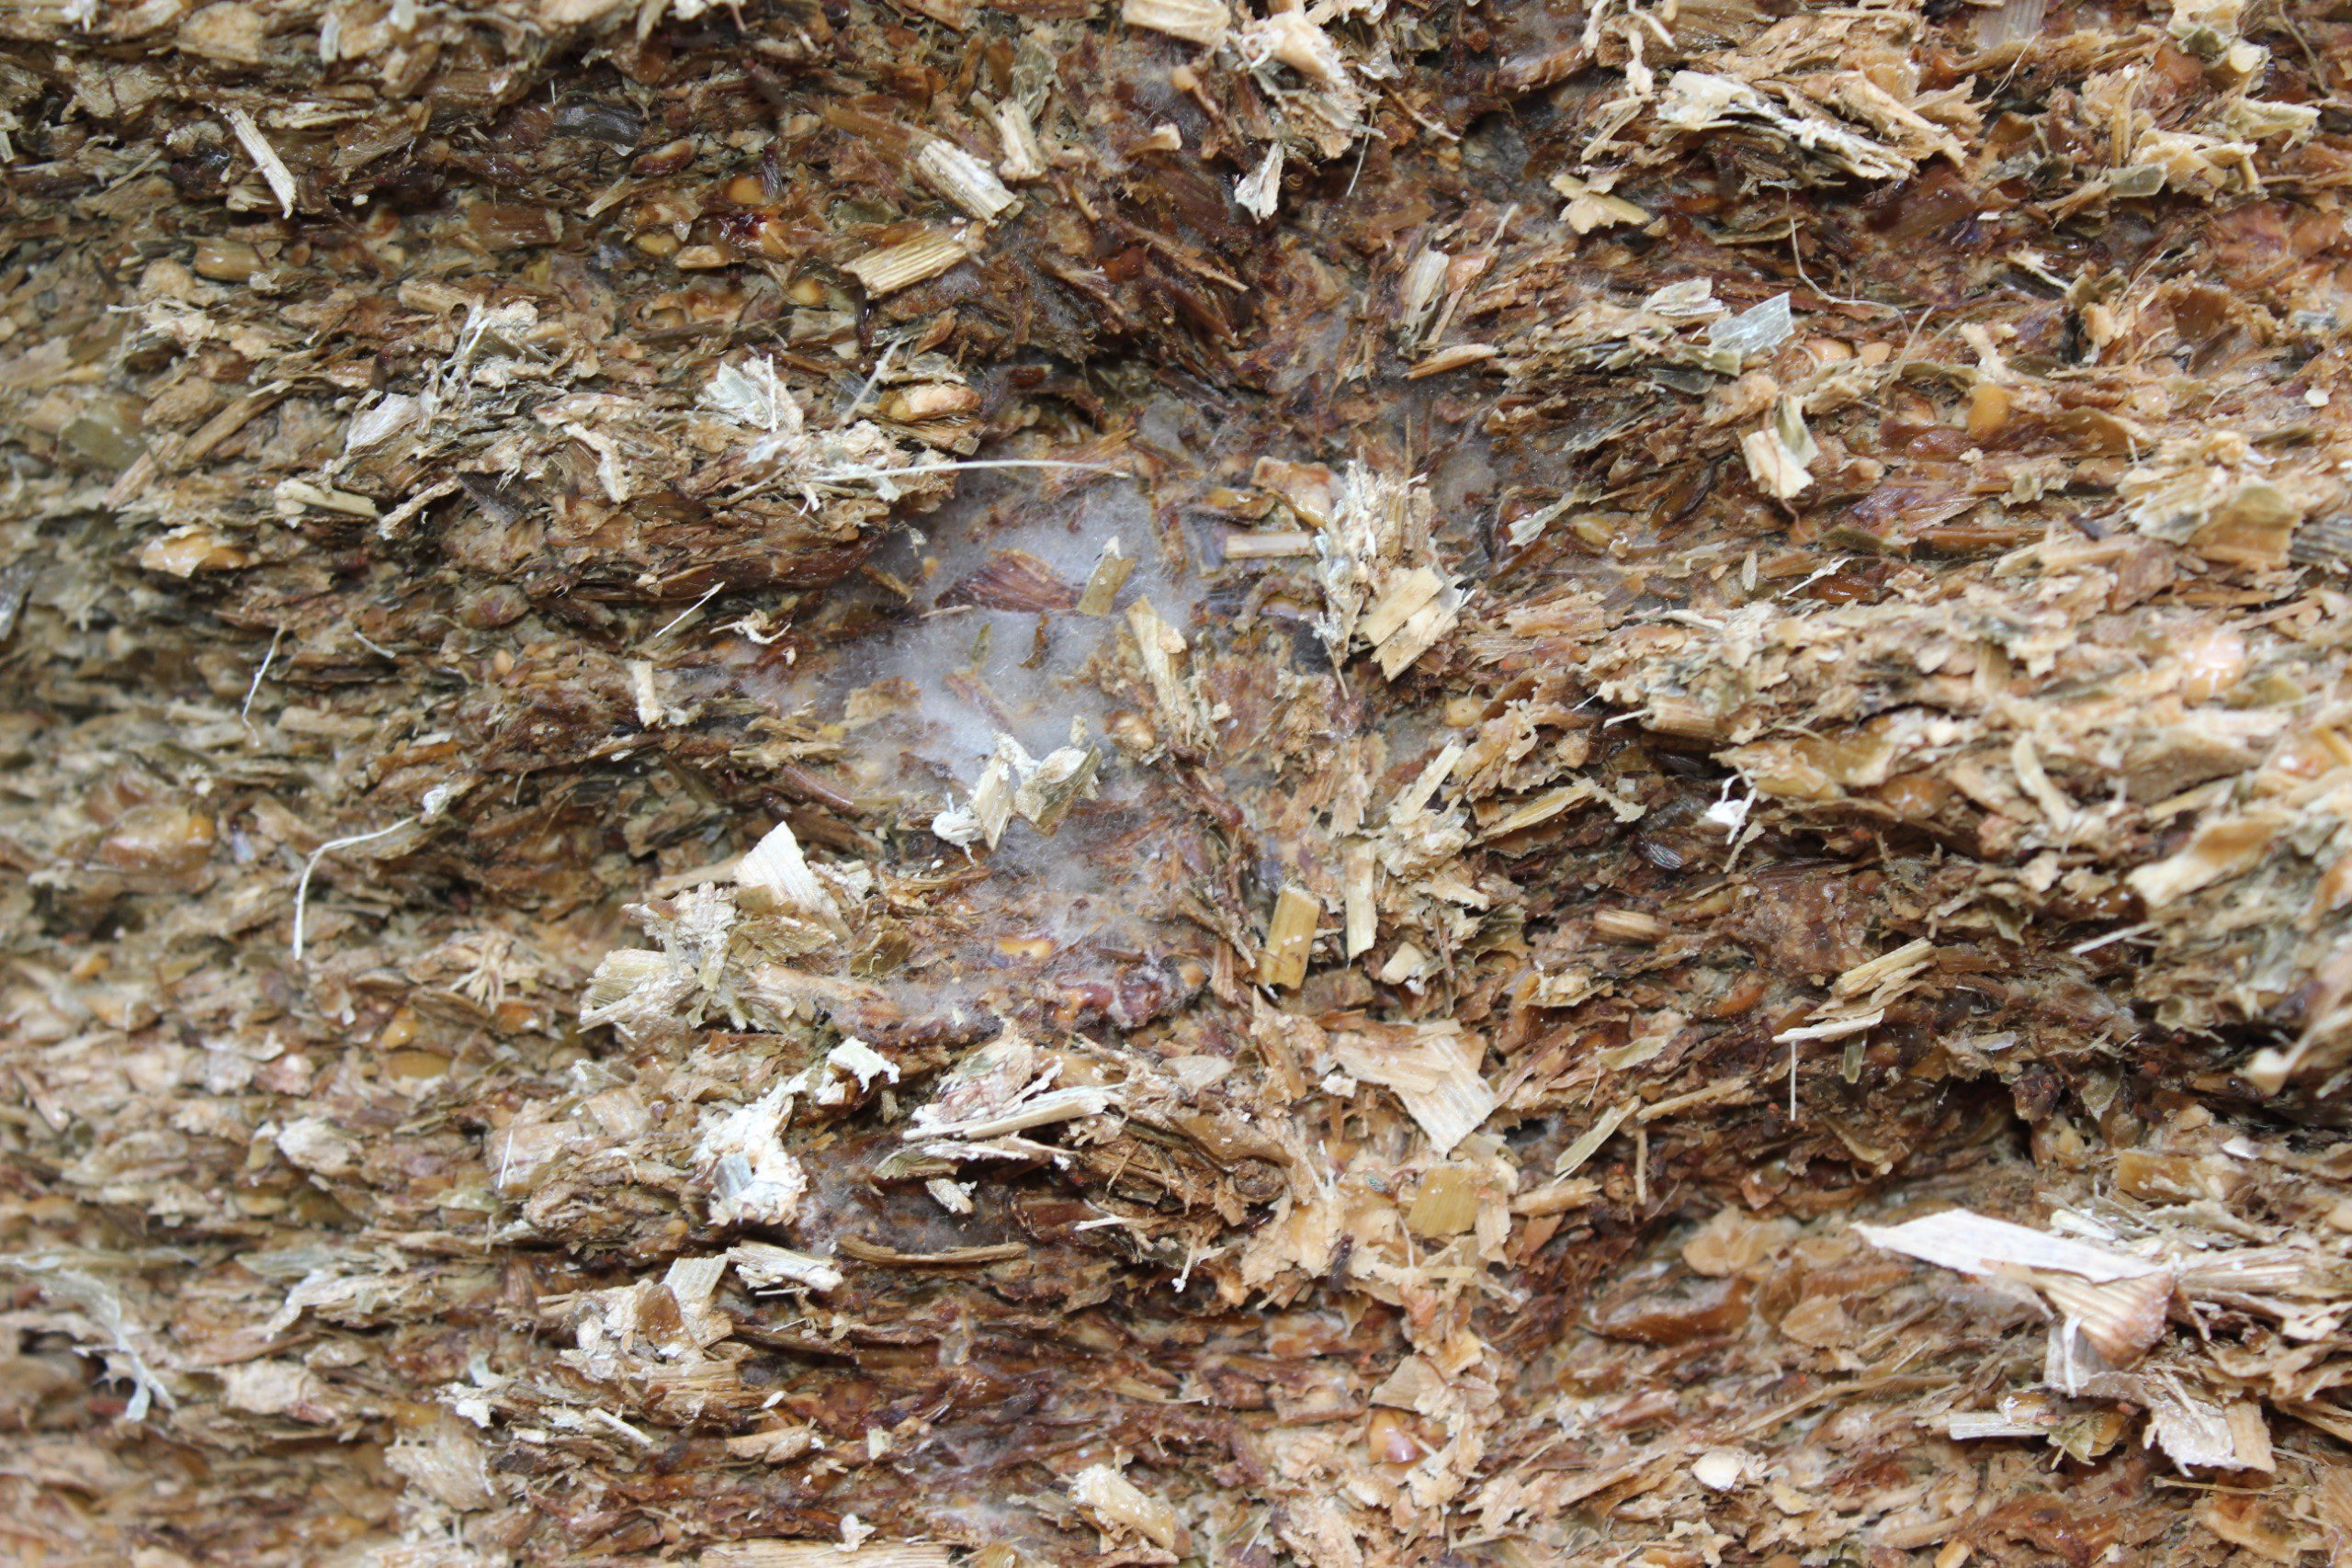 A loosened surface can cause white-grey mould to form in the silage.